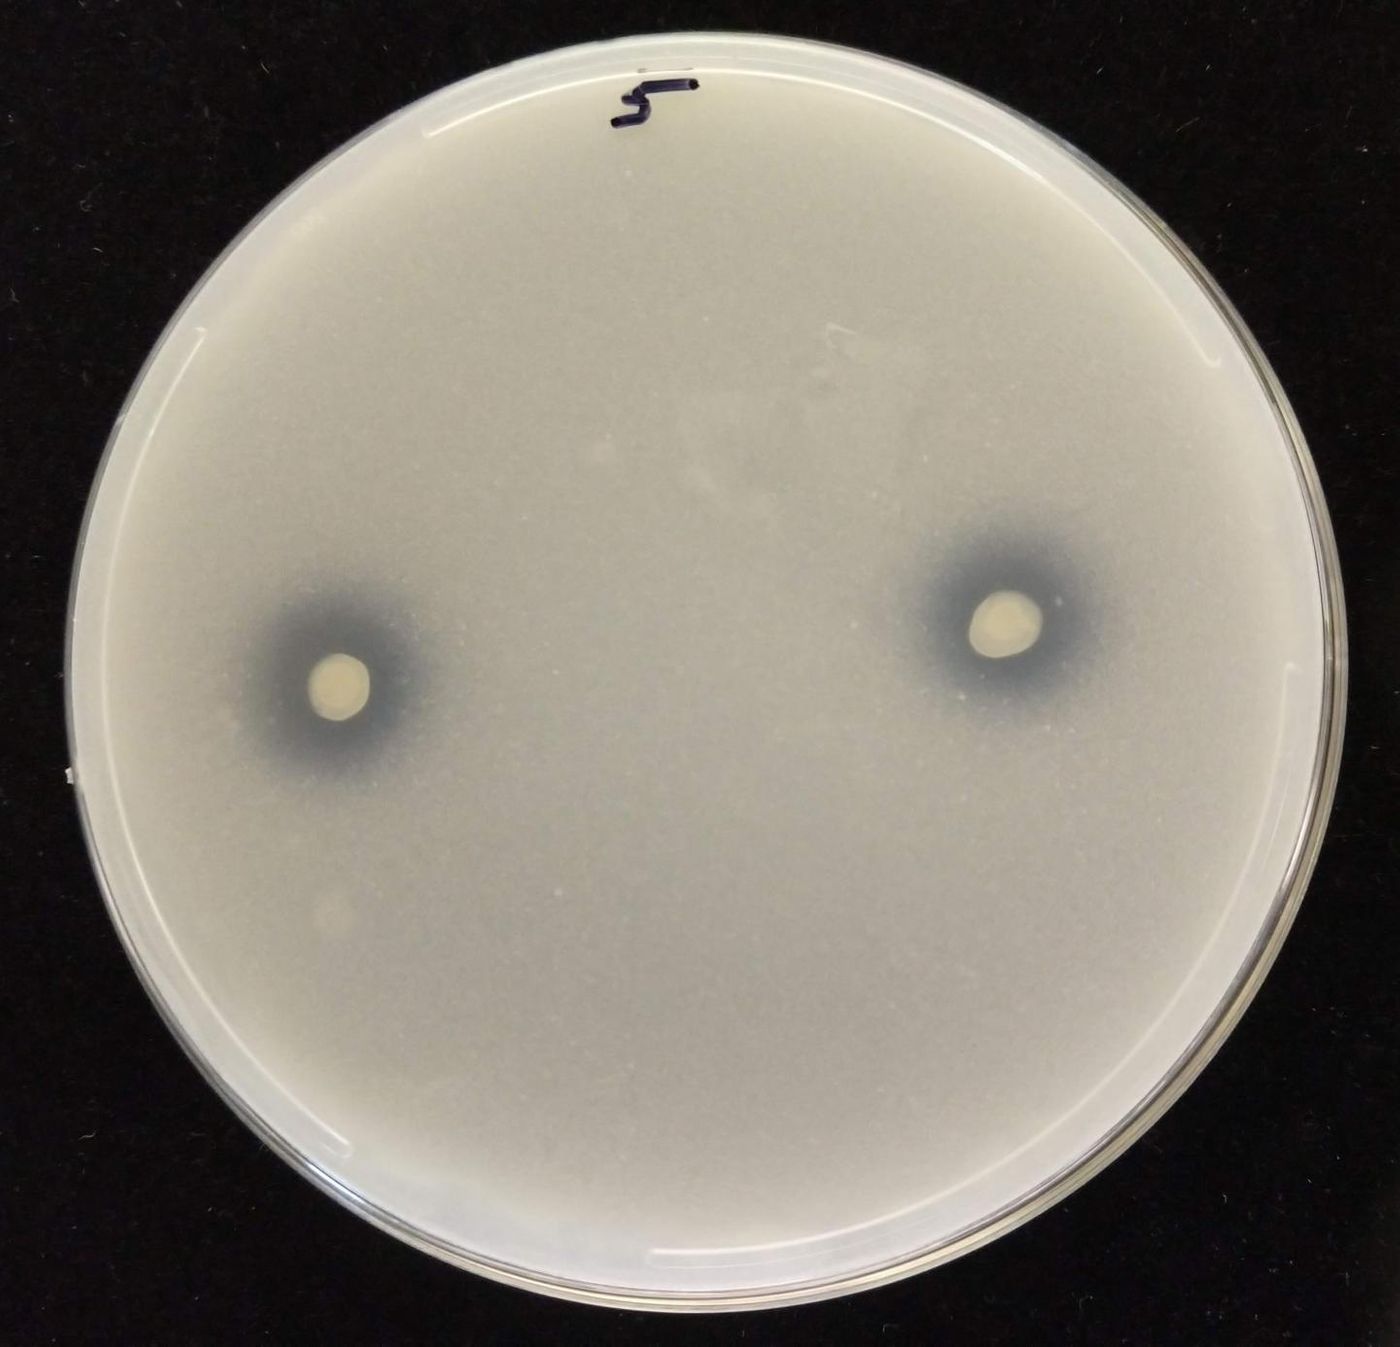 As an endophytic strain dissolves tricalcium phosphate, a clear halo is produced around the milky-white phosphate circles, as seen in this image of the process occurring in an agar medium. Credit  Sharon Doty/University of Washington